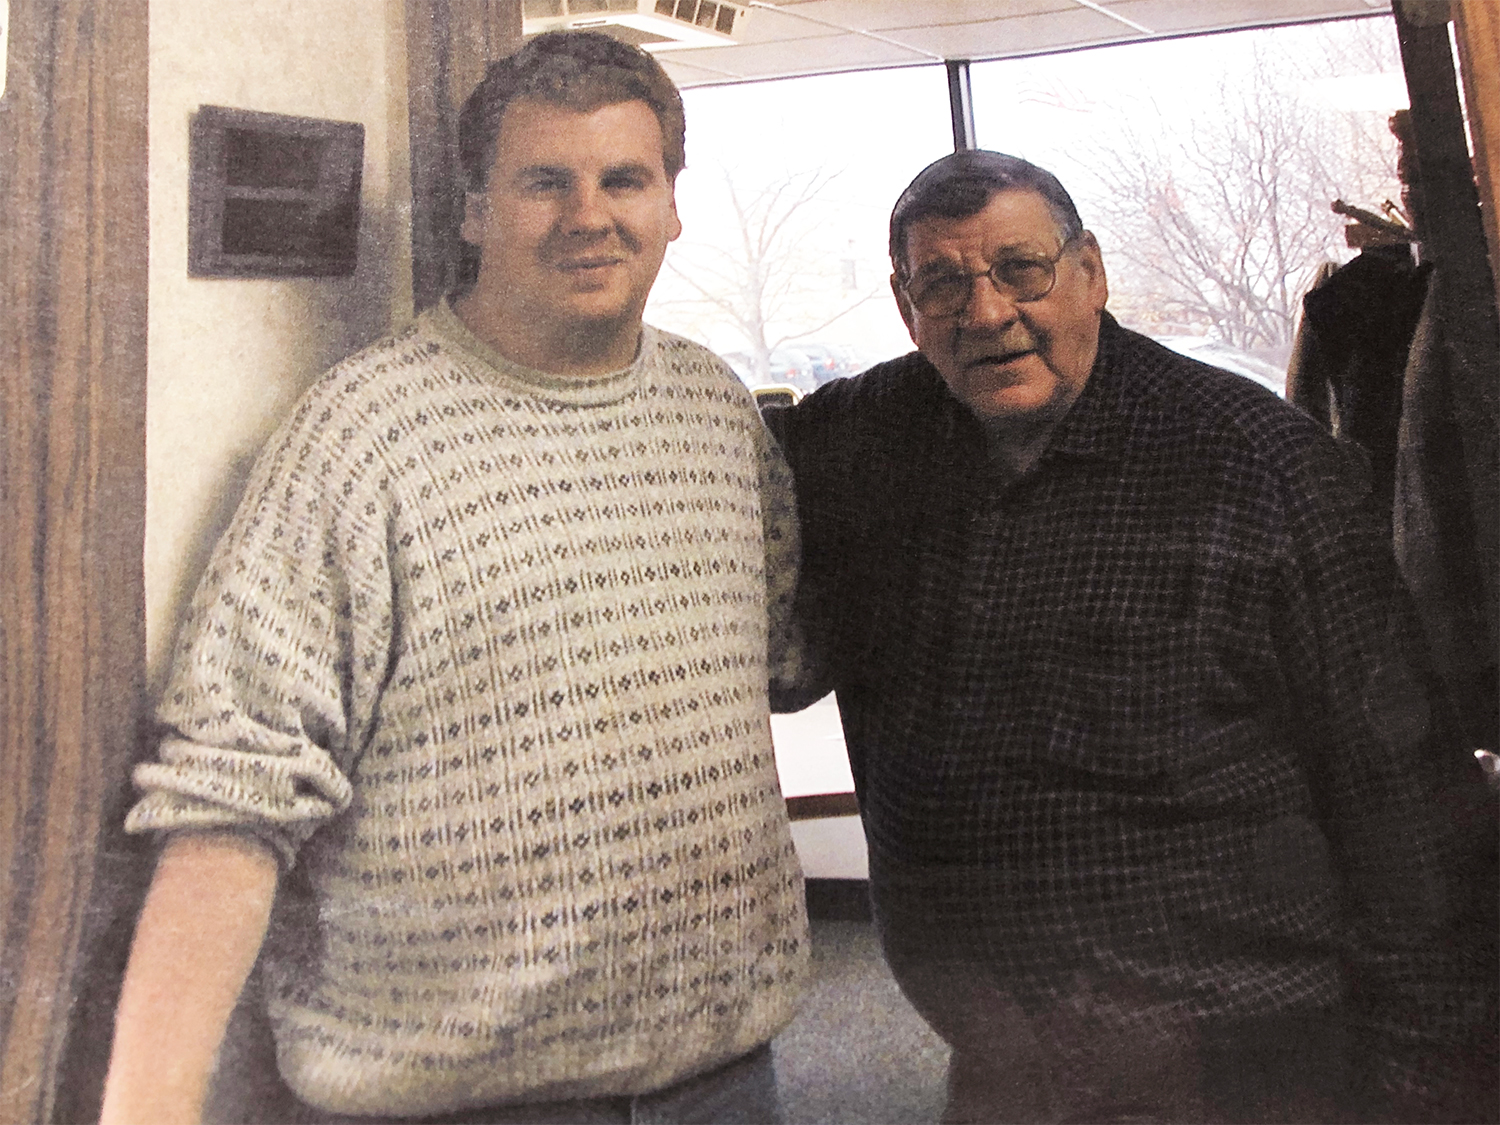 History of PMD: Albie Kitts founded the Sterling Heights plastic molding company in 1985. His son, Gary, began working with him when he was 15, and Gary is the president today. This is a rare print photograph taken of the two before Albie's passing.